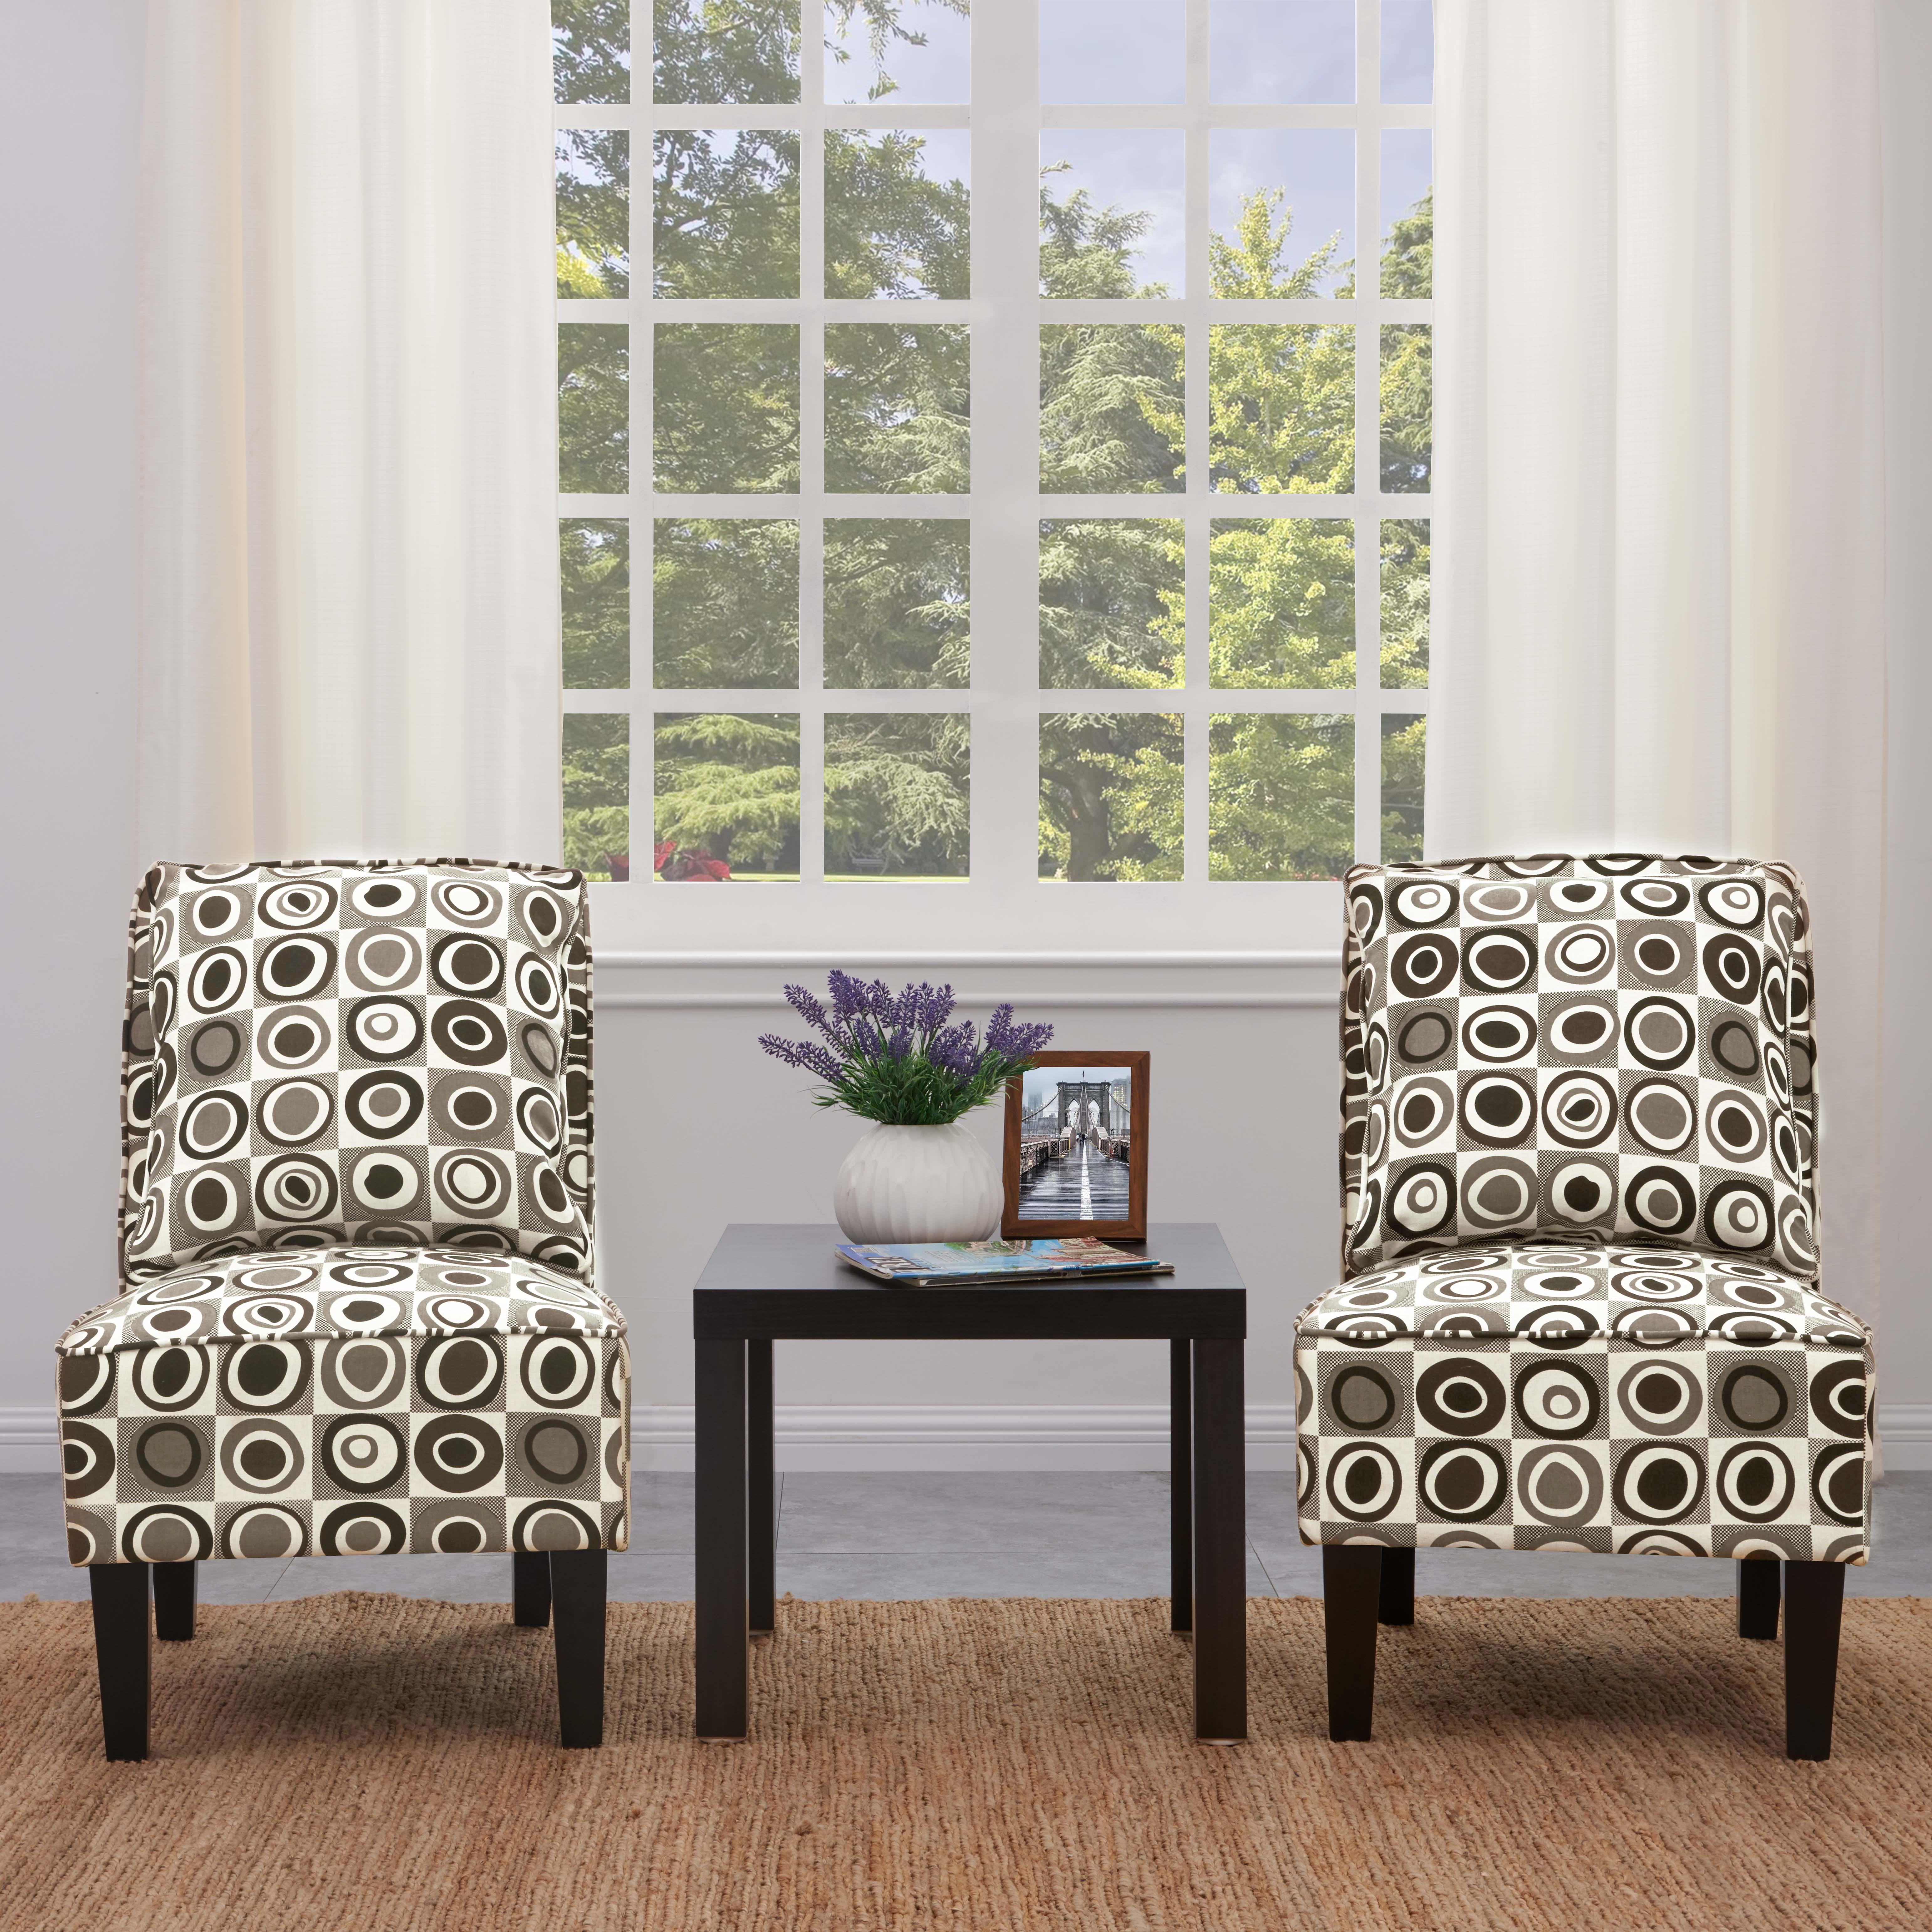 Homesvale Dani Multi-Color Set of 2 Slipper Chairs - image 5 of 9